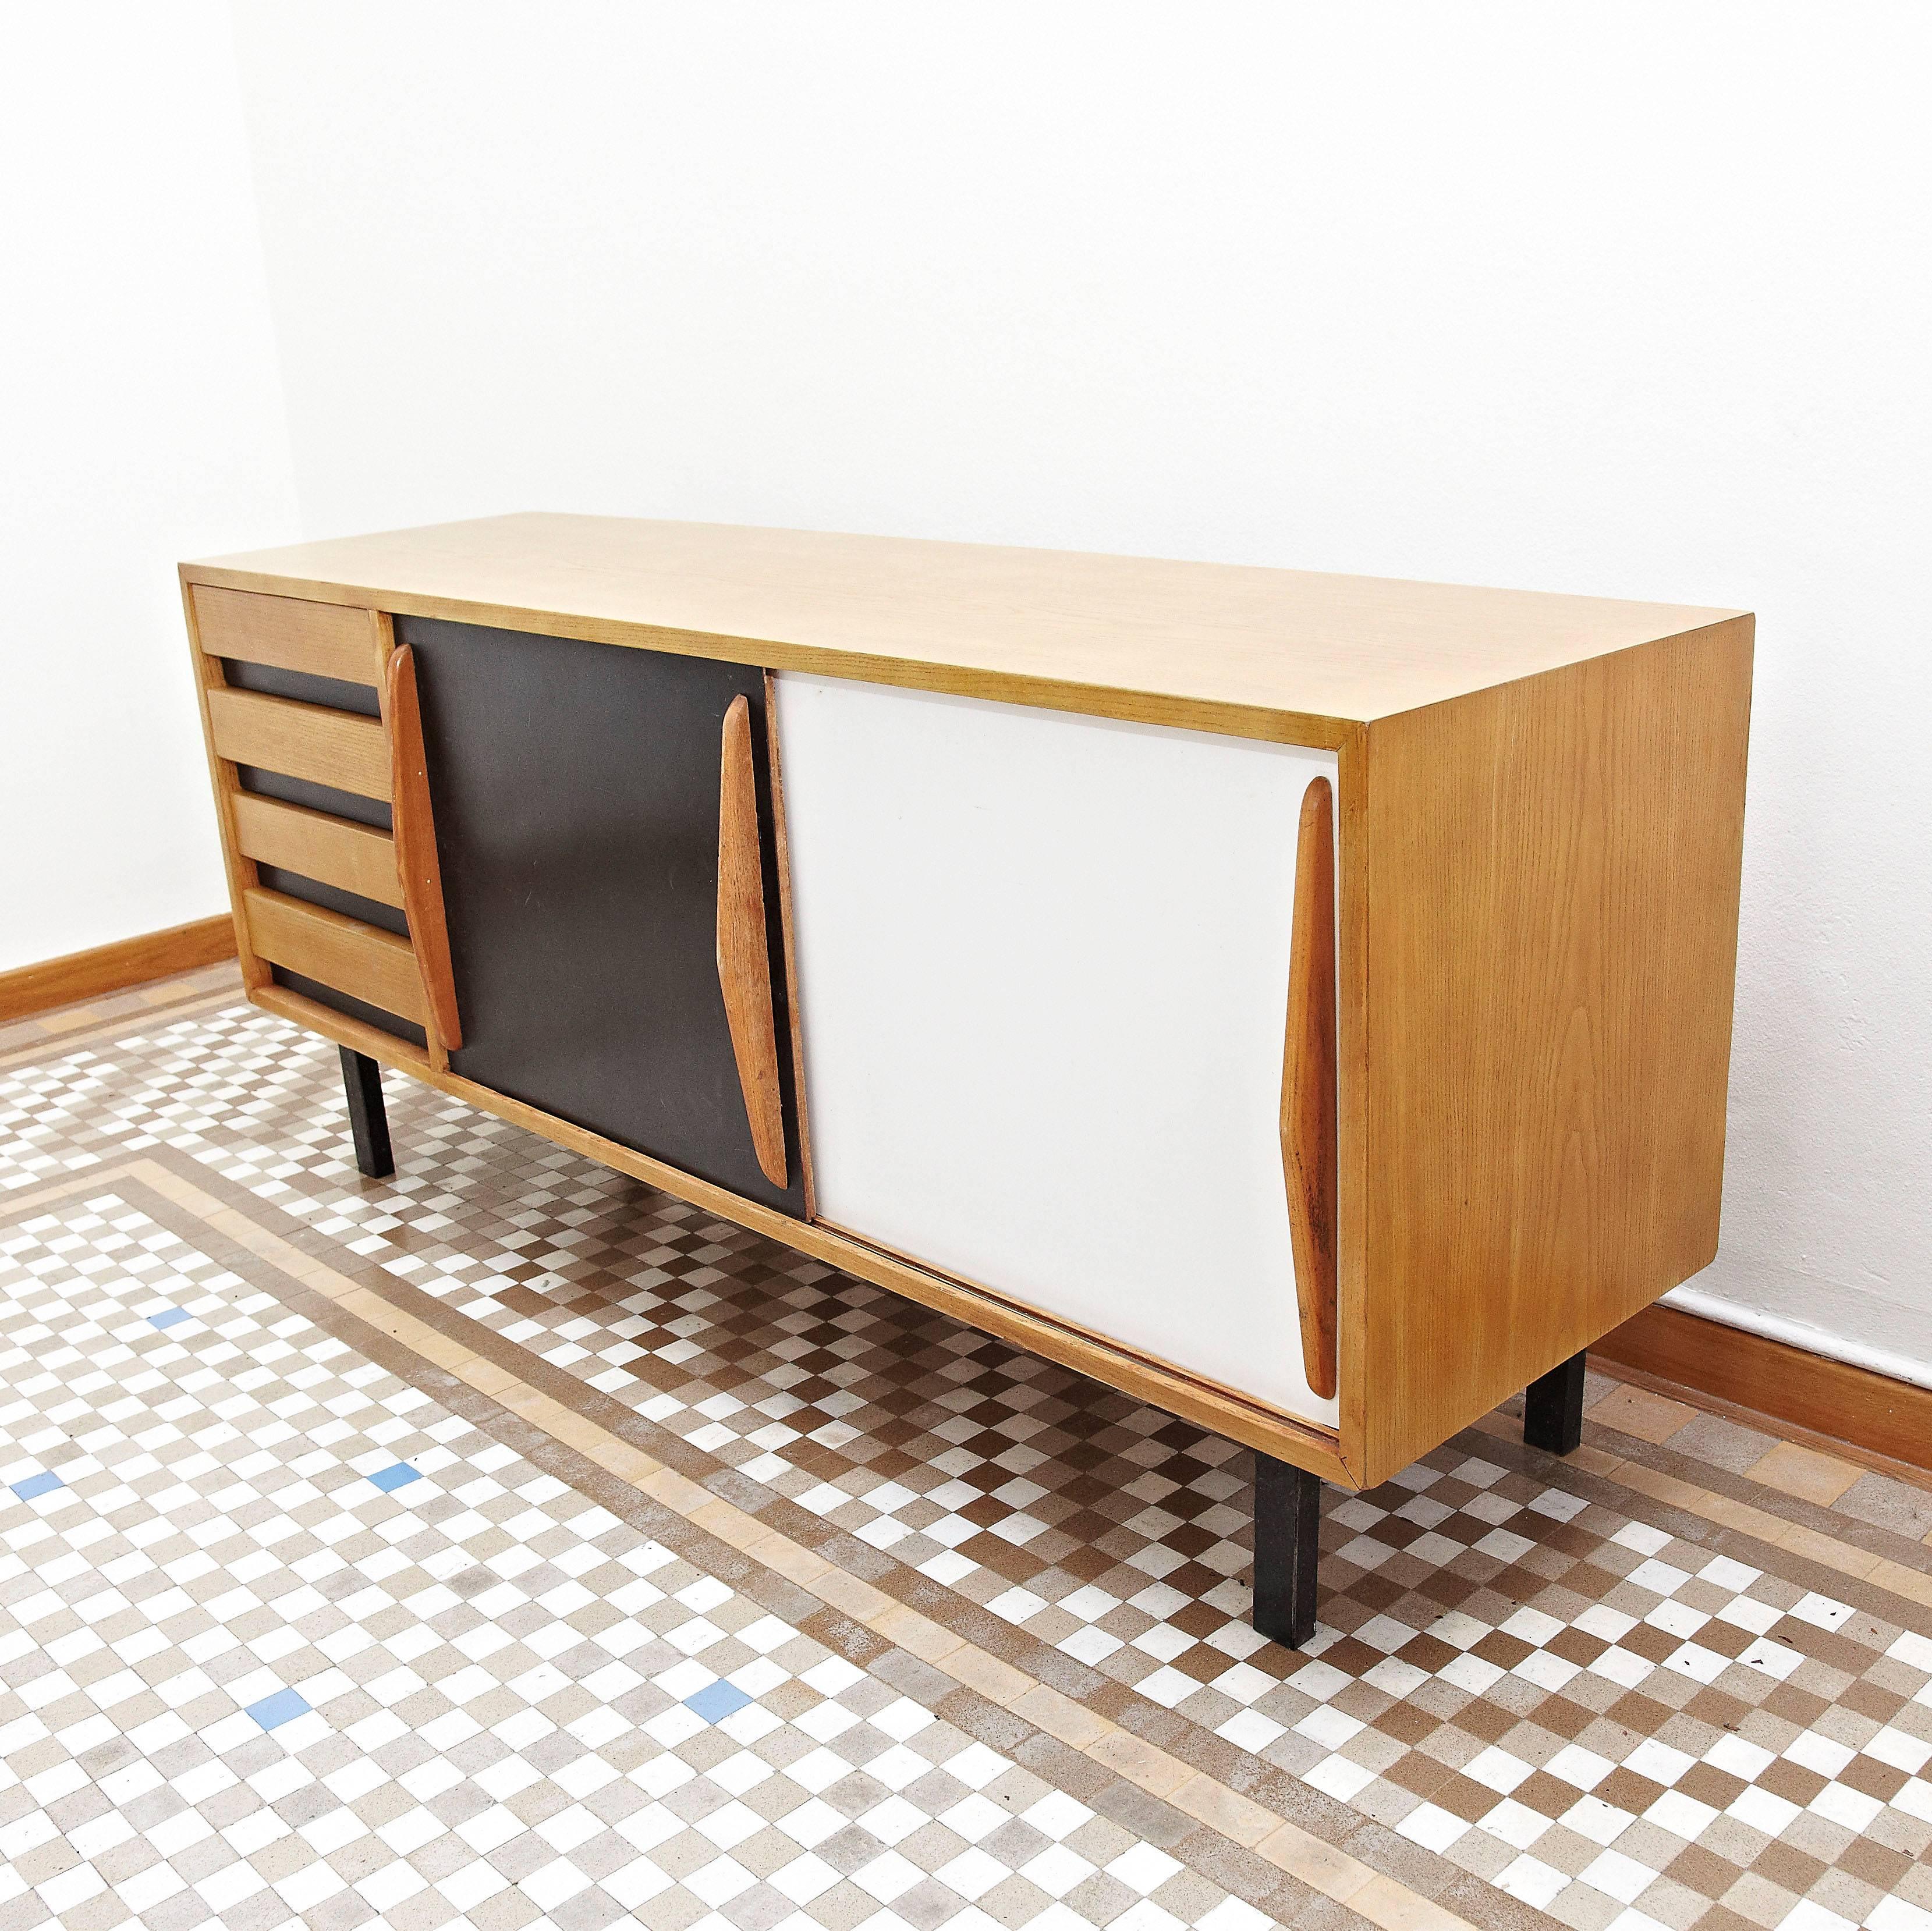 Sideboard designed by Charlotte Perriand, circa 1950.
Edited by Steph Simon (France).
Steel base, wood structure and grips, lacquered sliding doors.

Provenance: Cansado, Mauritania (Africa).

In good original condition, with minor wear